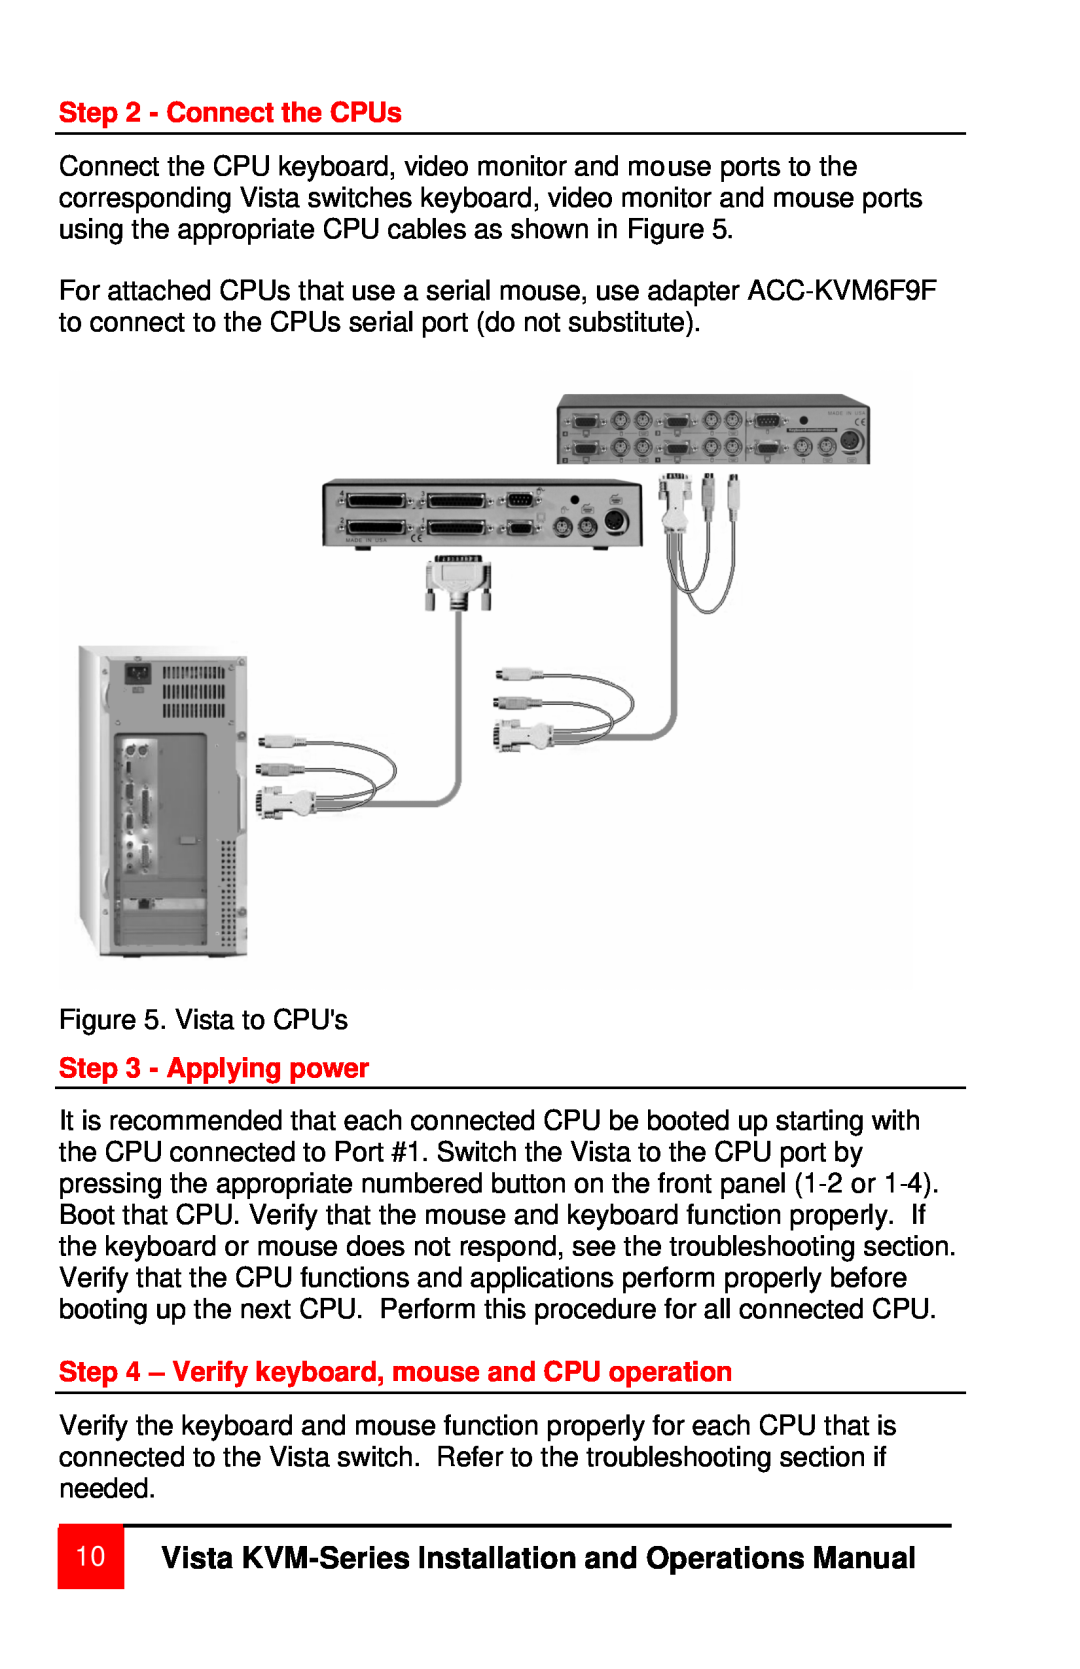 Rose electronic MAN-V8 manual Vista KVM-Series Installation and Operations Manual, Connect the CPUs, Applying power 